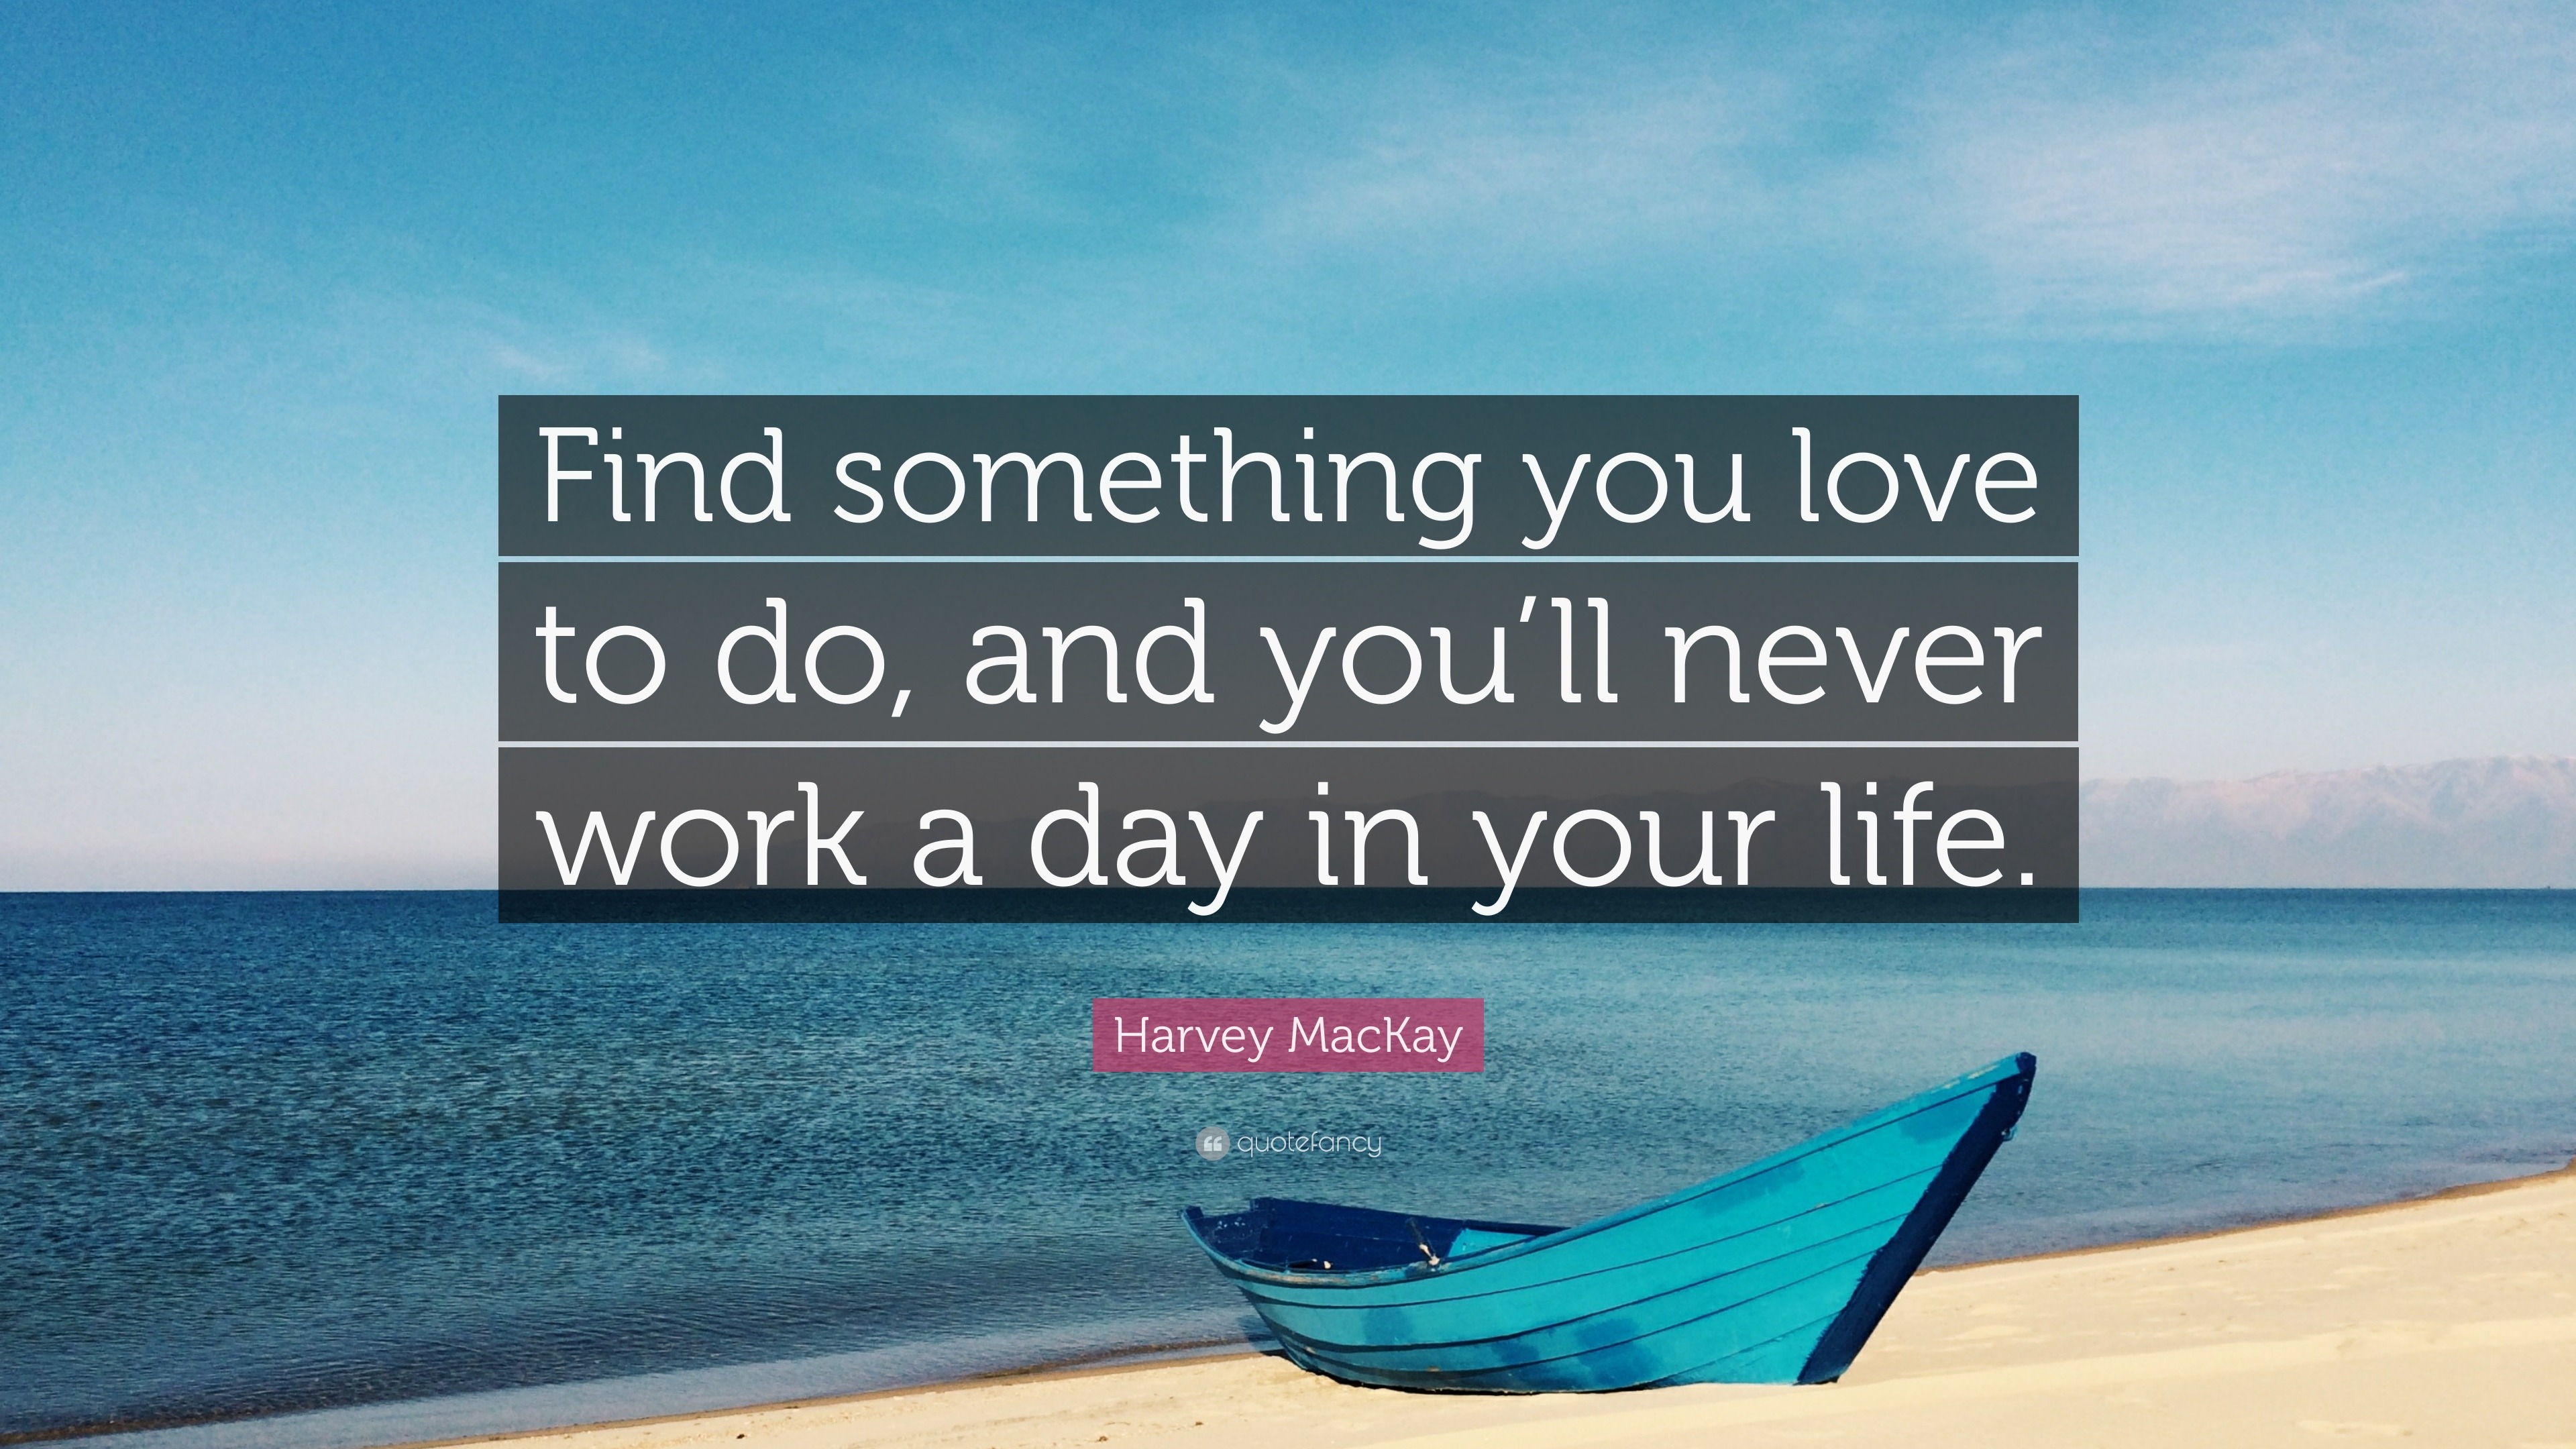 Harvey Mackay Quote “find Something You Love To Do And Youll Never Work A Day In Your Life”